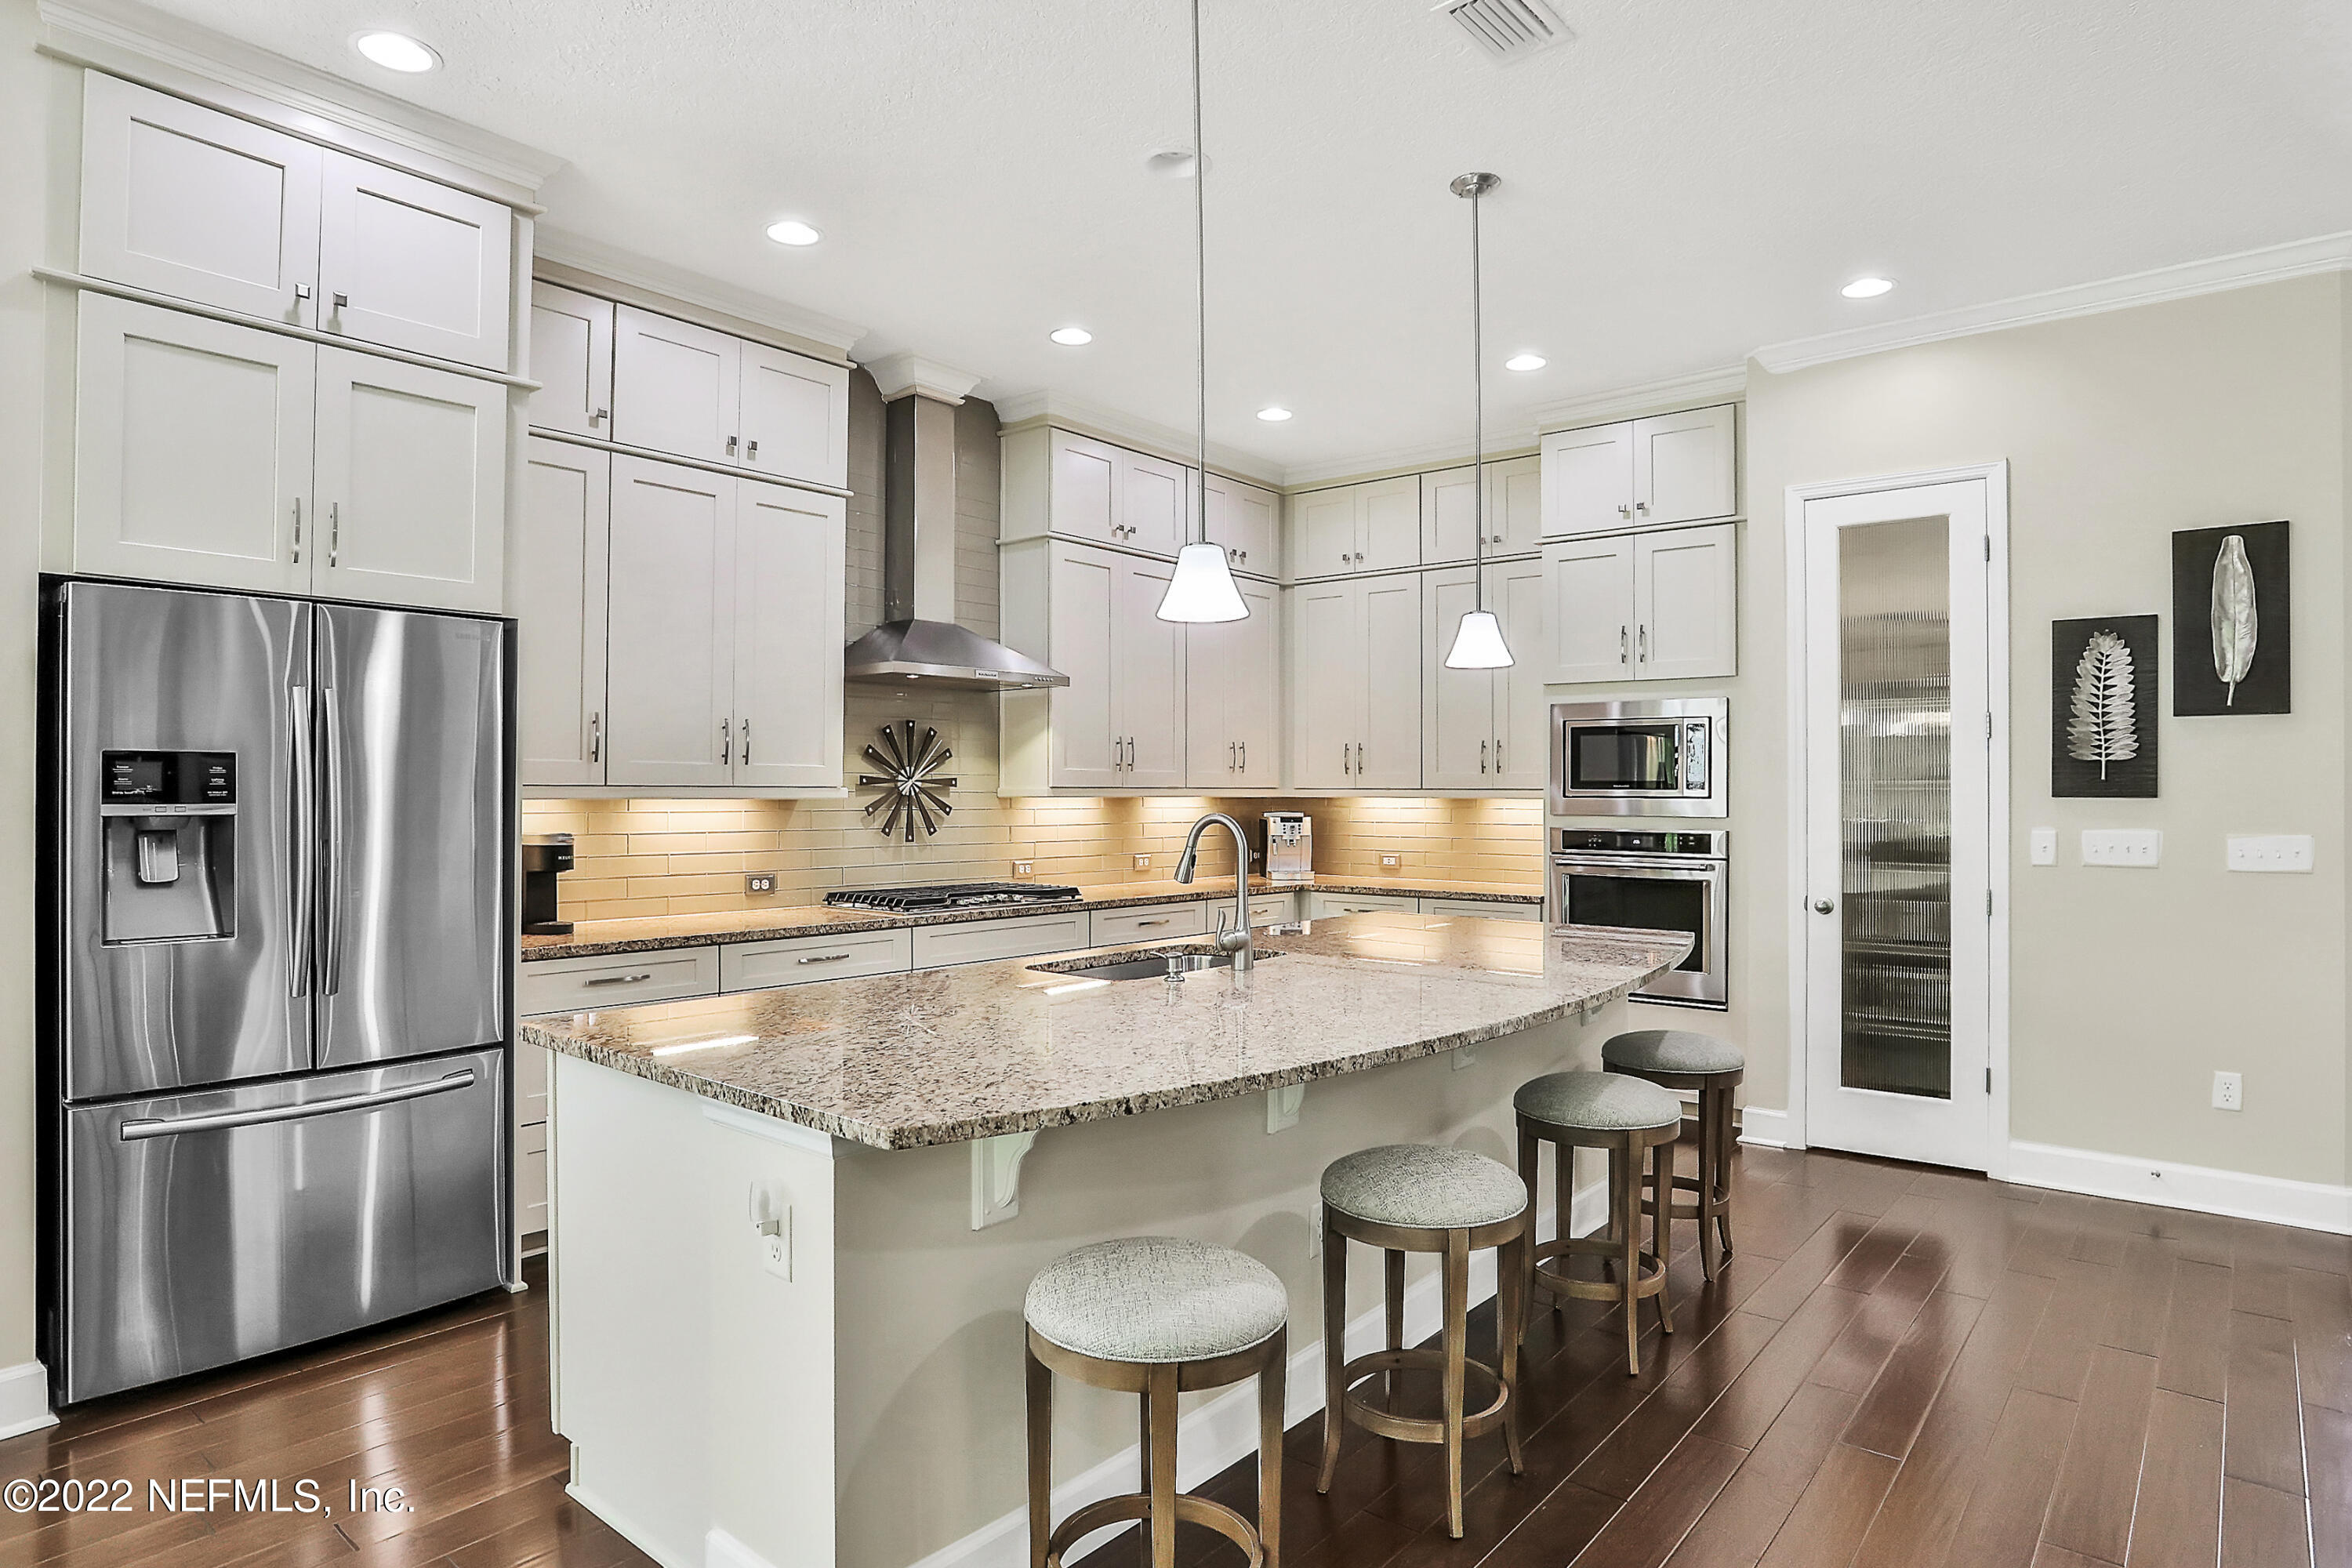 a kitchen with granite countertop a counter space stainless steel appliances and cabinets